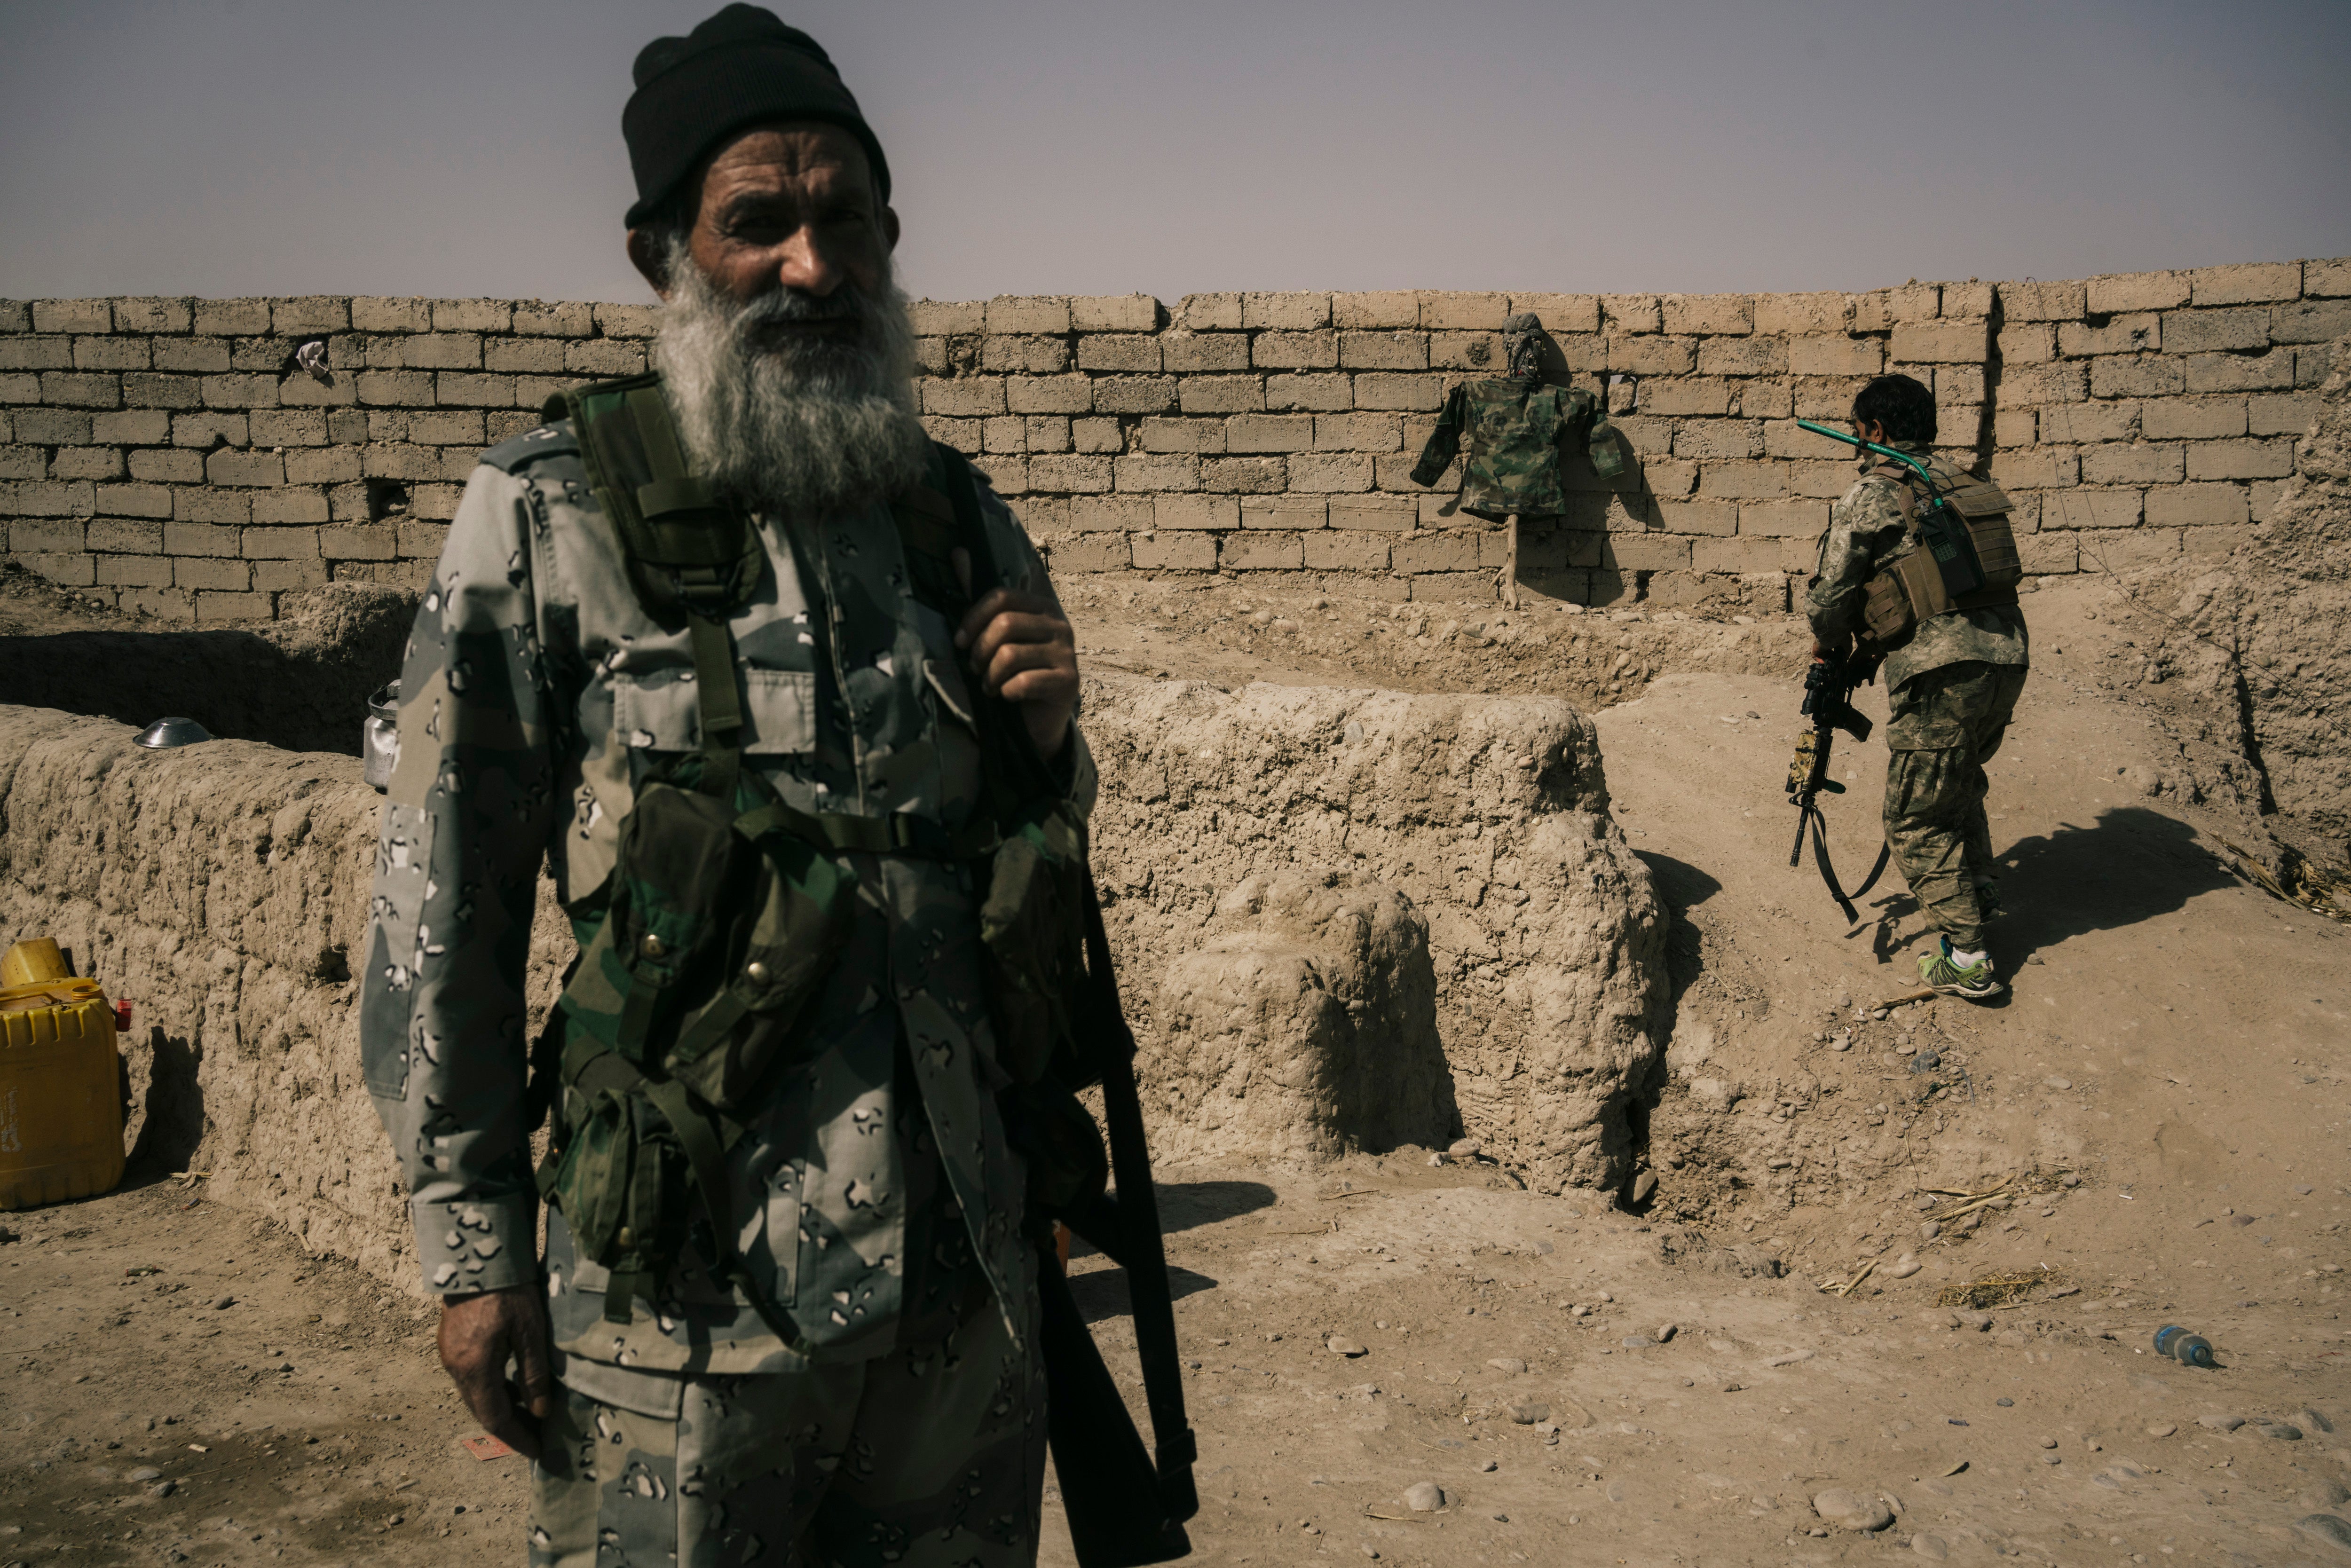 Afghan army soldiers exposed to Taliban fire on the Nazar front line outpost near Lashkar Gah